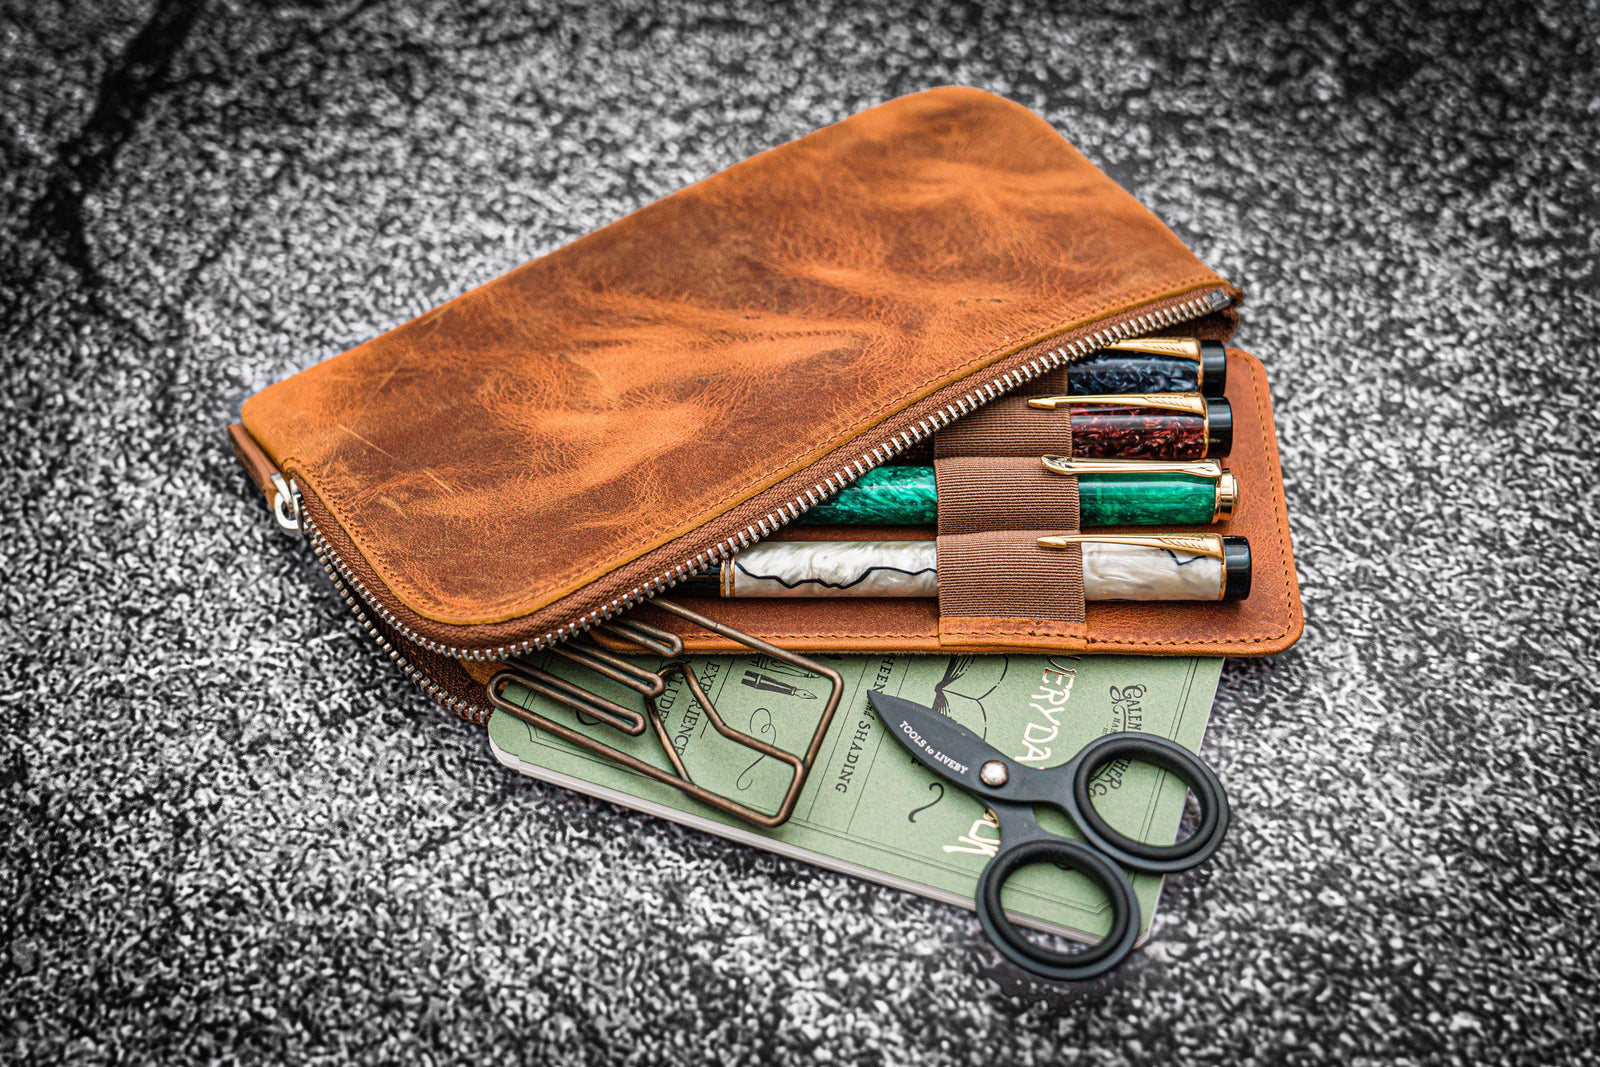 Hand-Crafted Leather Phone Pouch - Hand-Crafted Leather Phone Pouch